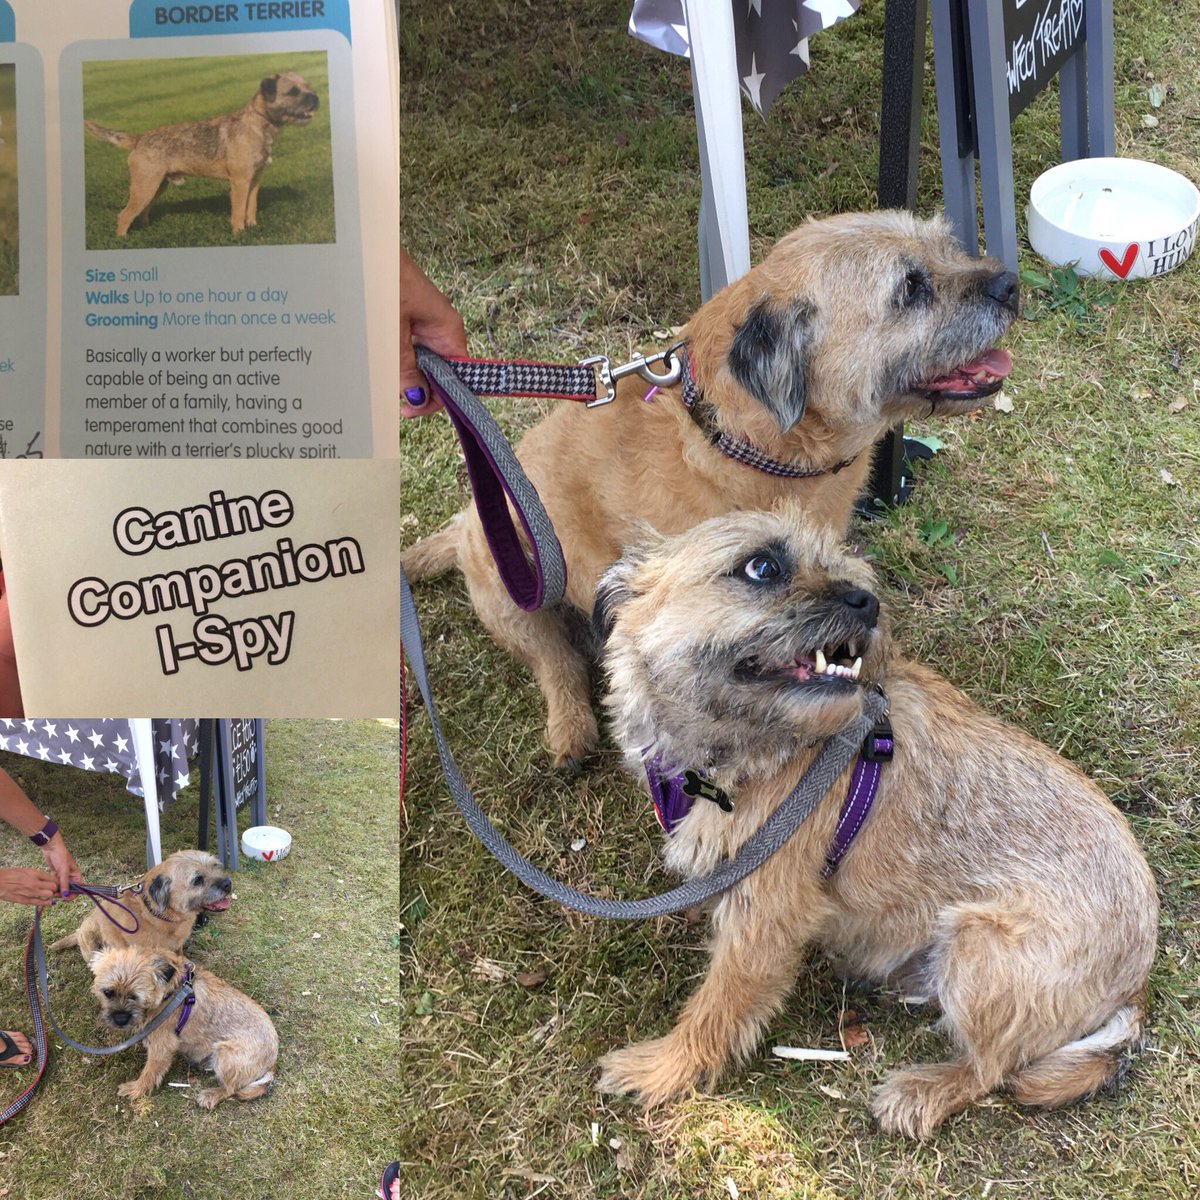 Hello to the amazing Ollie & Fizz who are our Border Terriers in our #caninecompanionispy 
#dogs #pooch #borderterrier #borderterriersofinstagram #borderterrierlove #dogsofinstagram #dogsofinsta #dogsofinstaworld